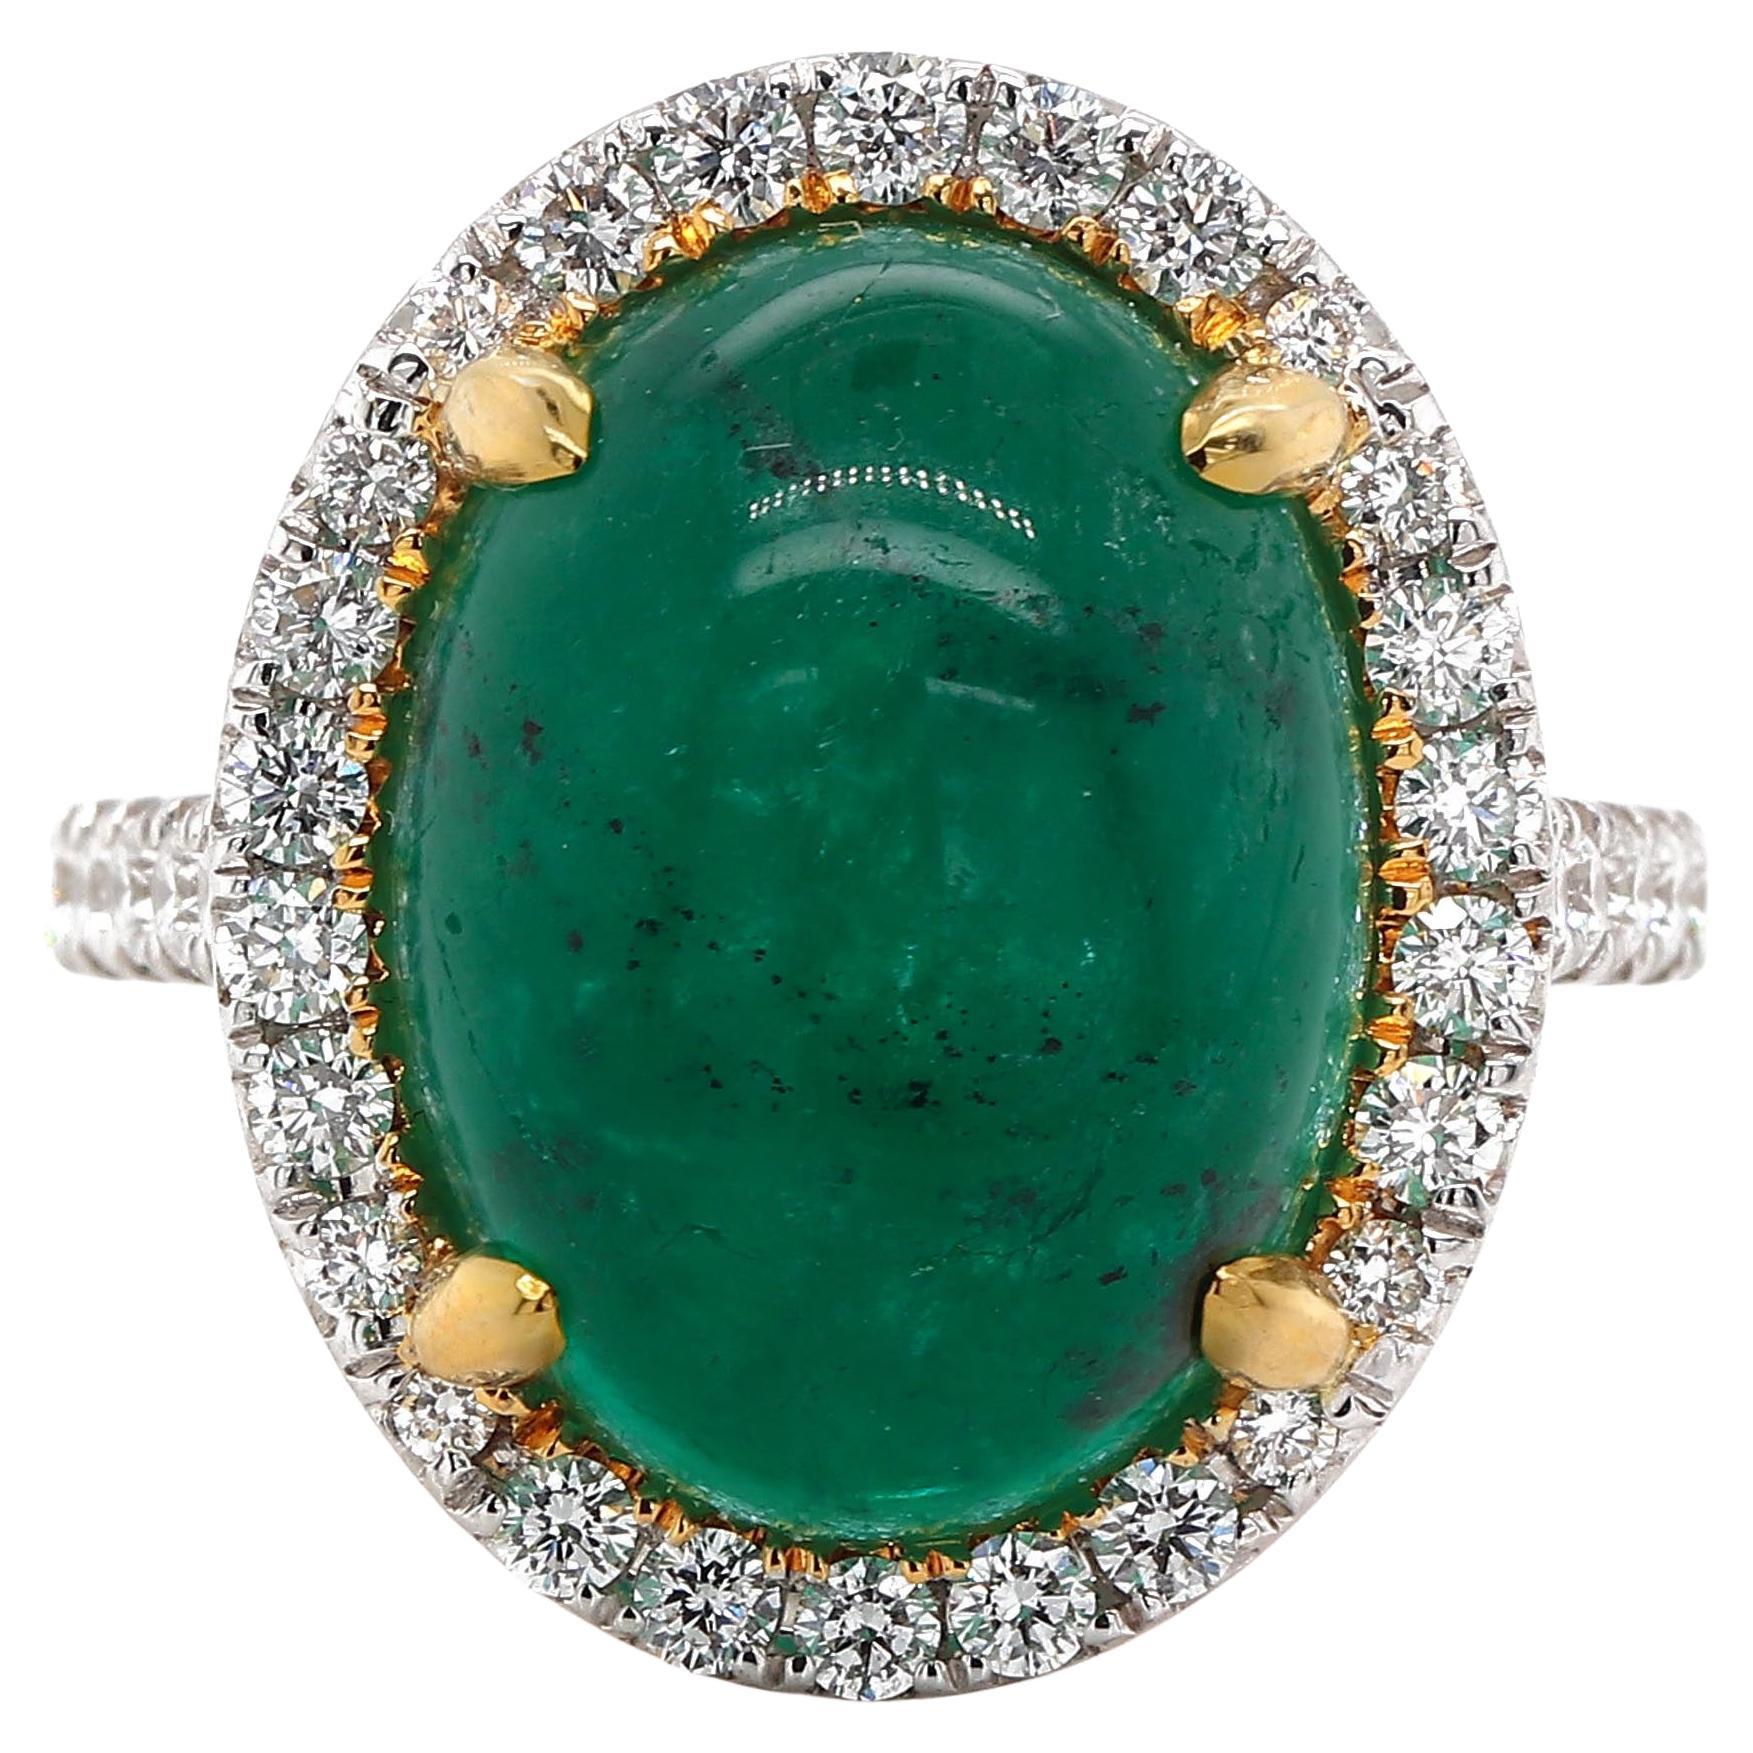 GIA Certified 9.17 Carat Cabochon Emerald and Diamonds Ring